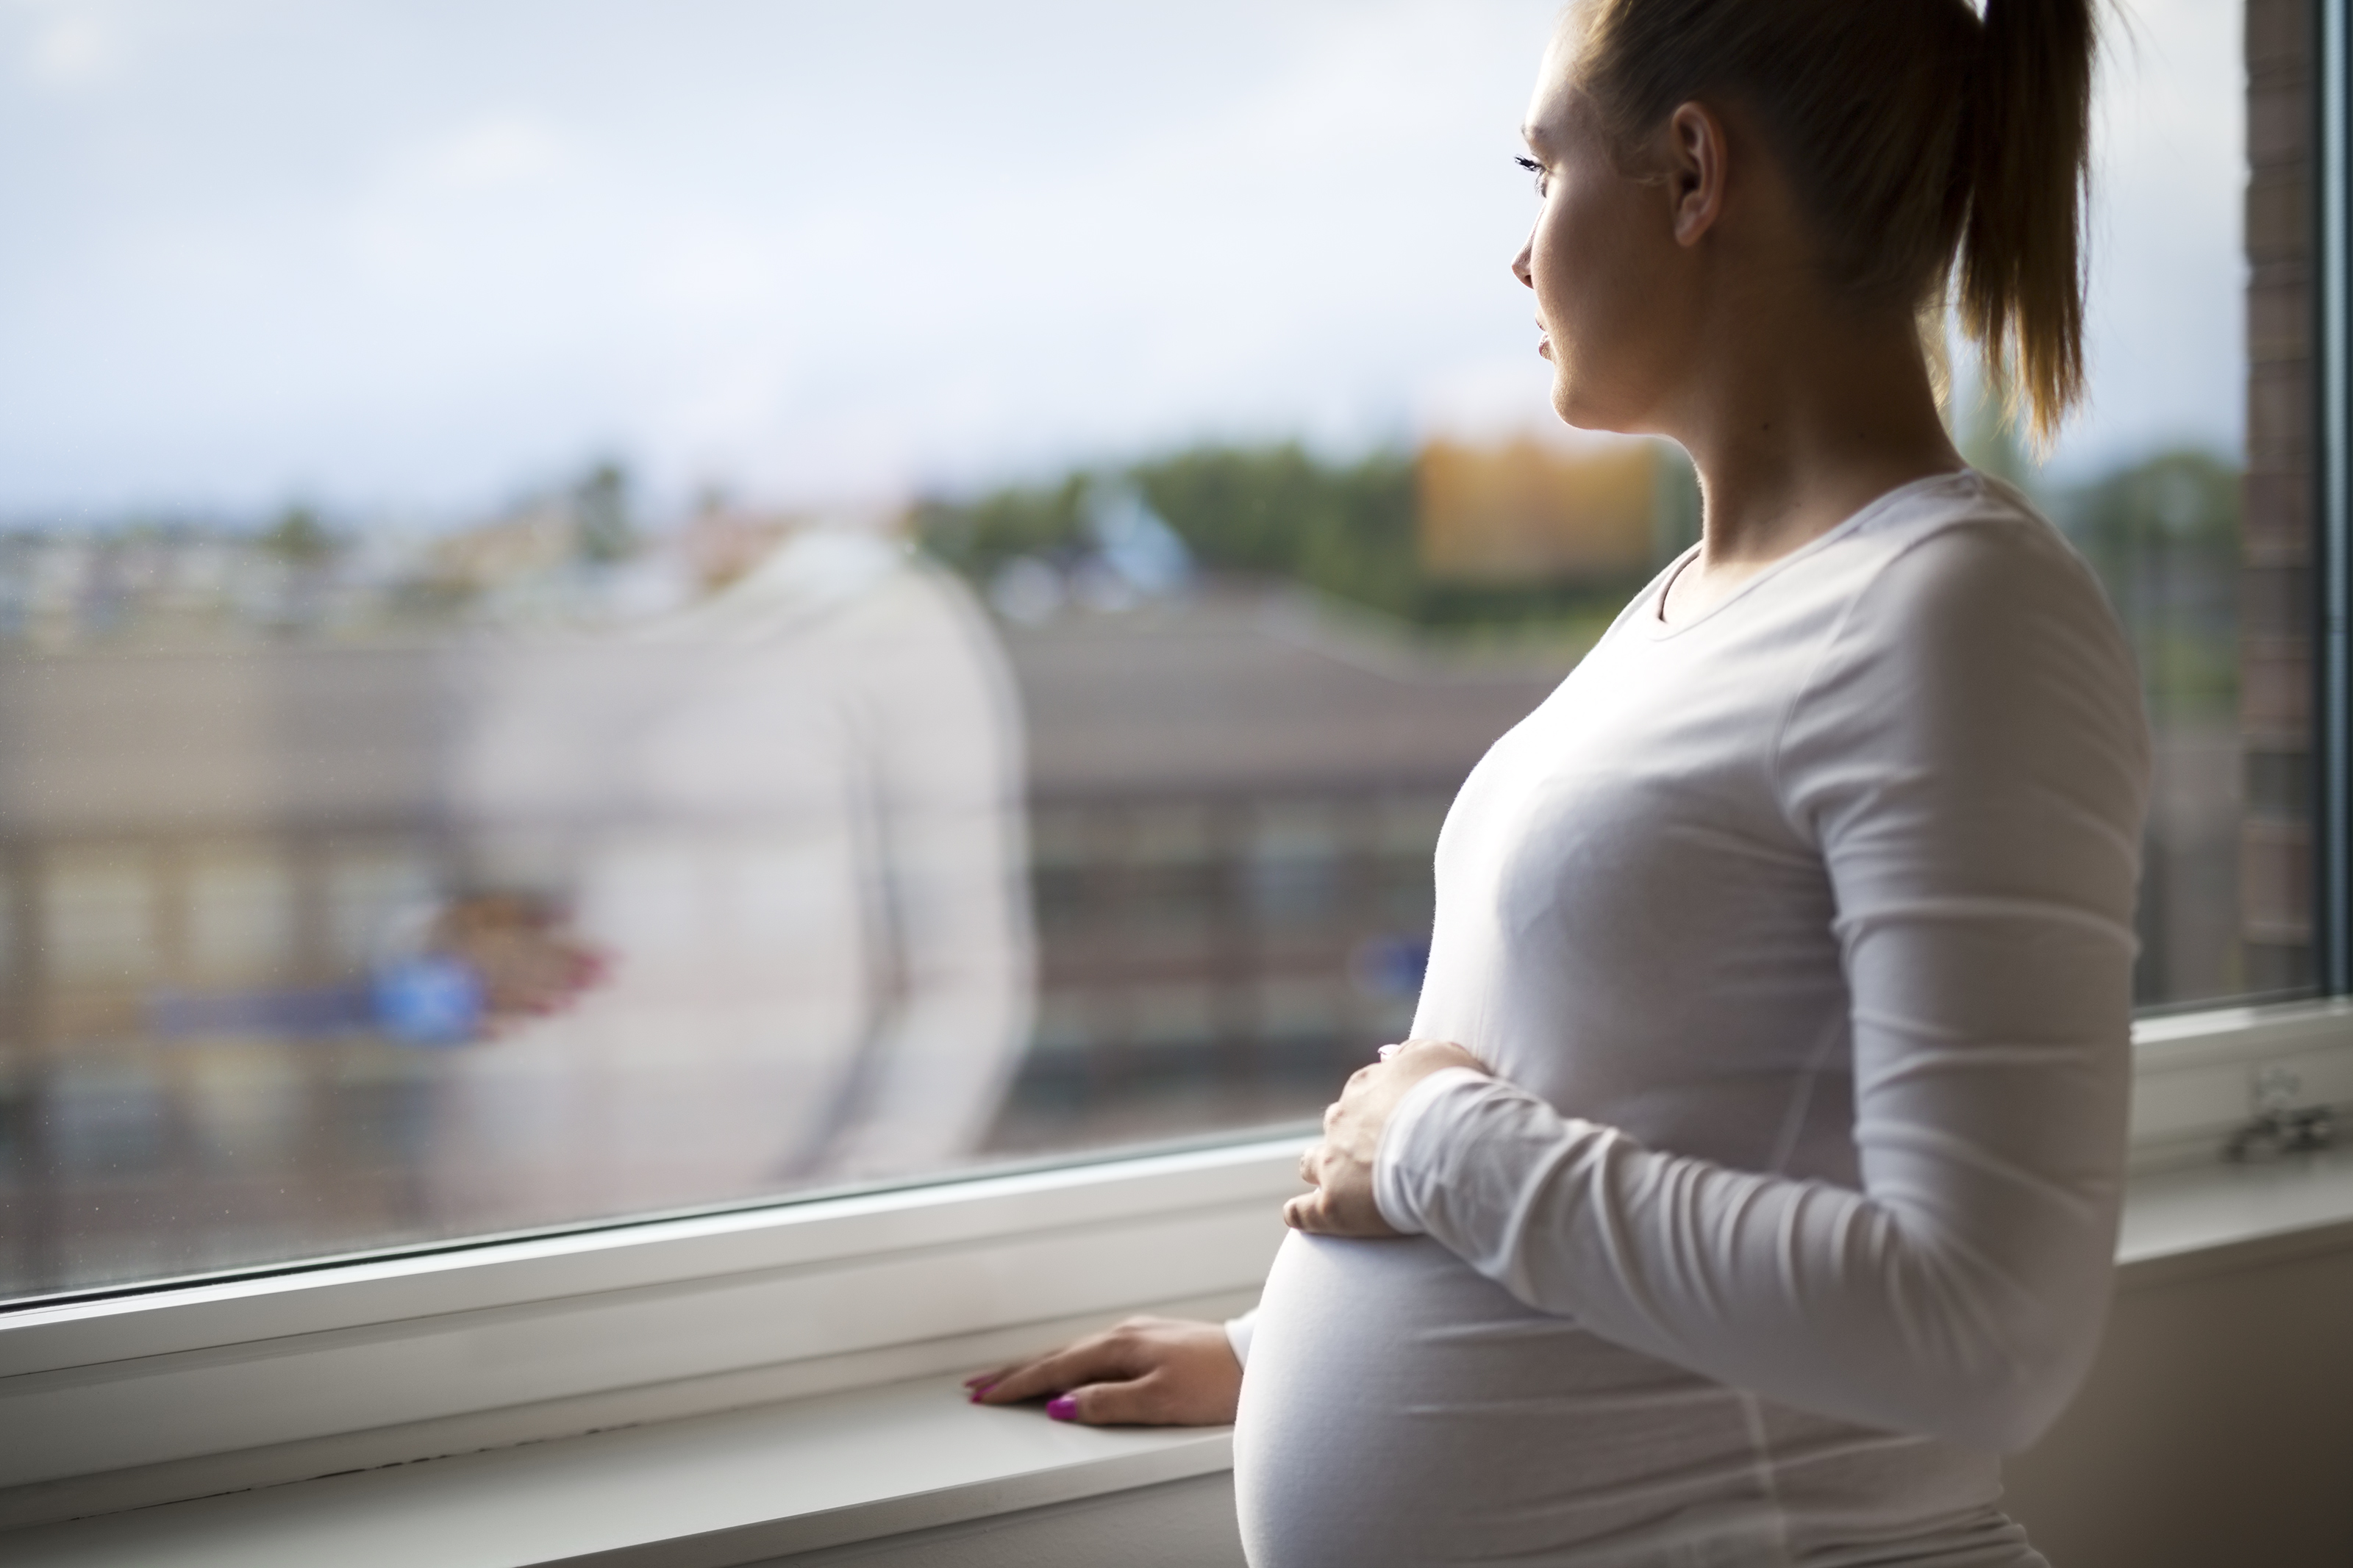 PIC - Pregnant woman by window